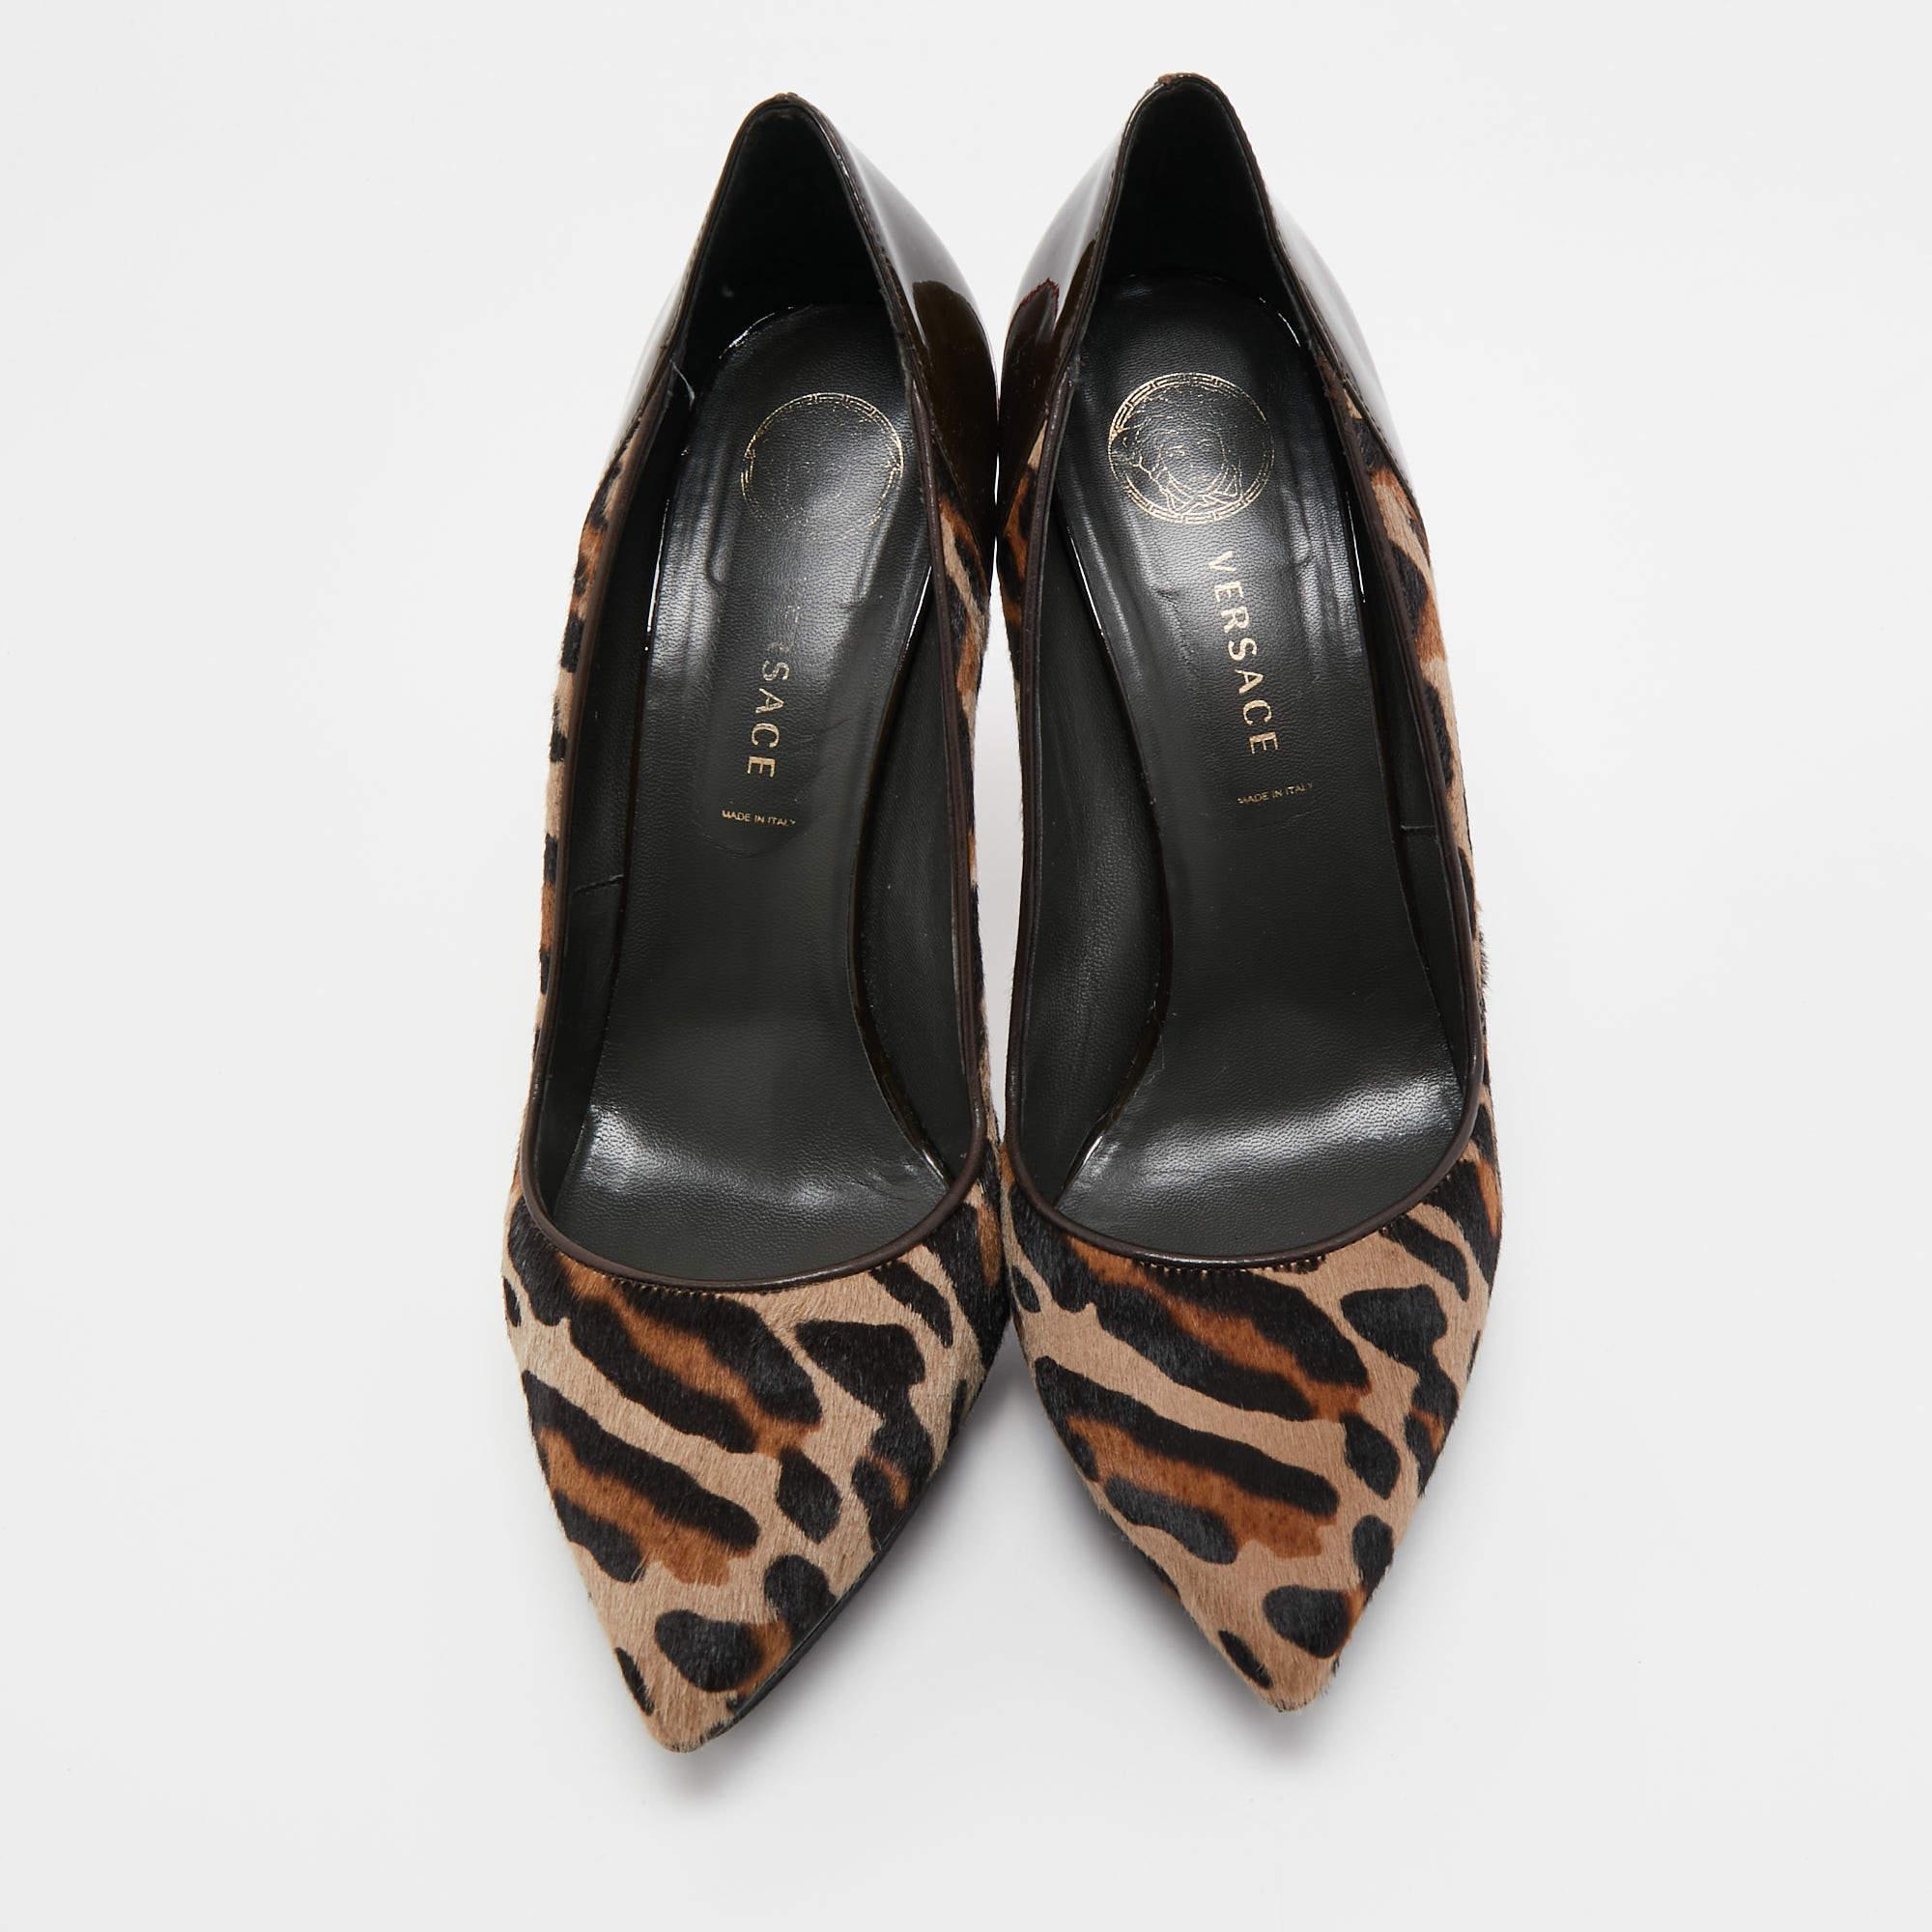 Versace Multicolor Patent Leather and Calf Hair Pointed Toe Pumps Size 41 In Good Condition For Sale In Dubai, Al Qouz 2